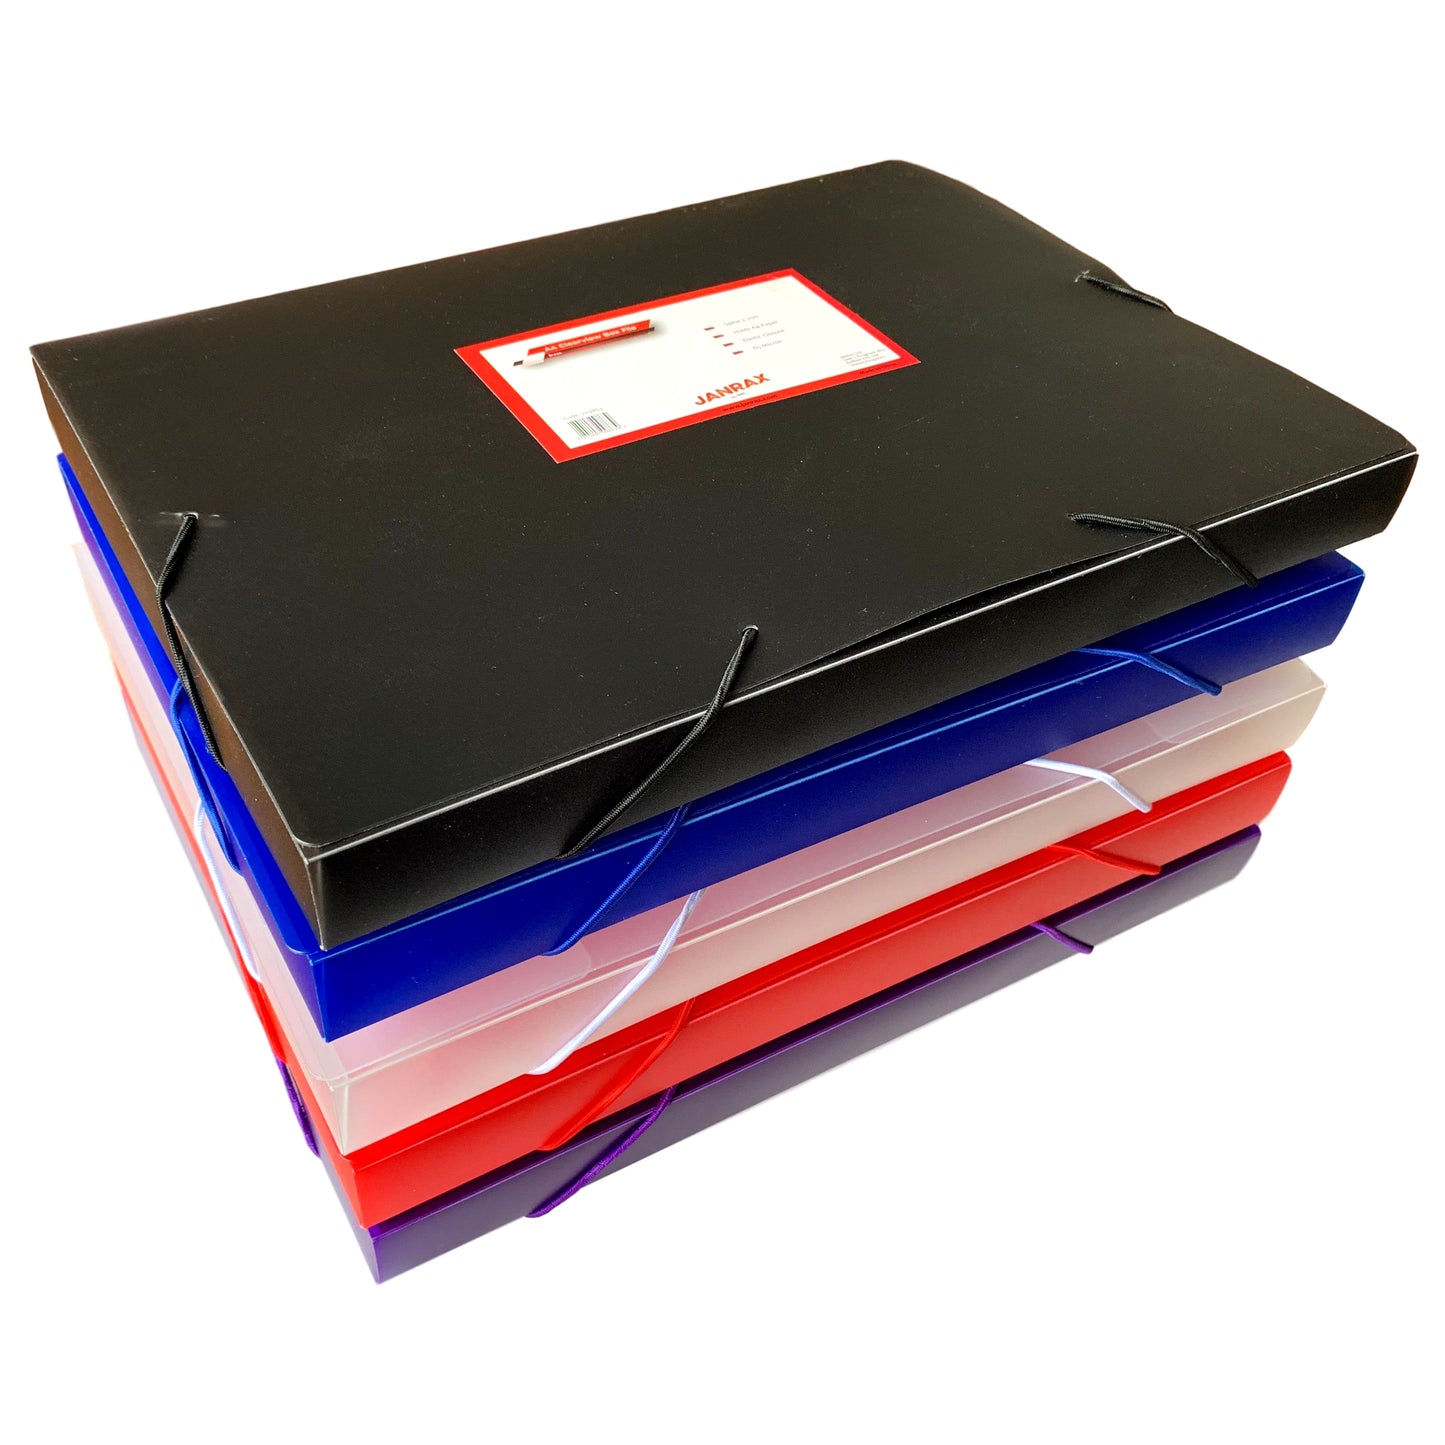 A4 Clearview Black Box File with Elastic Closure